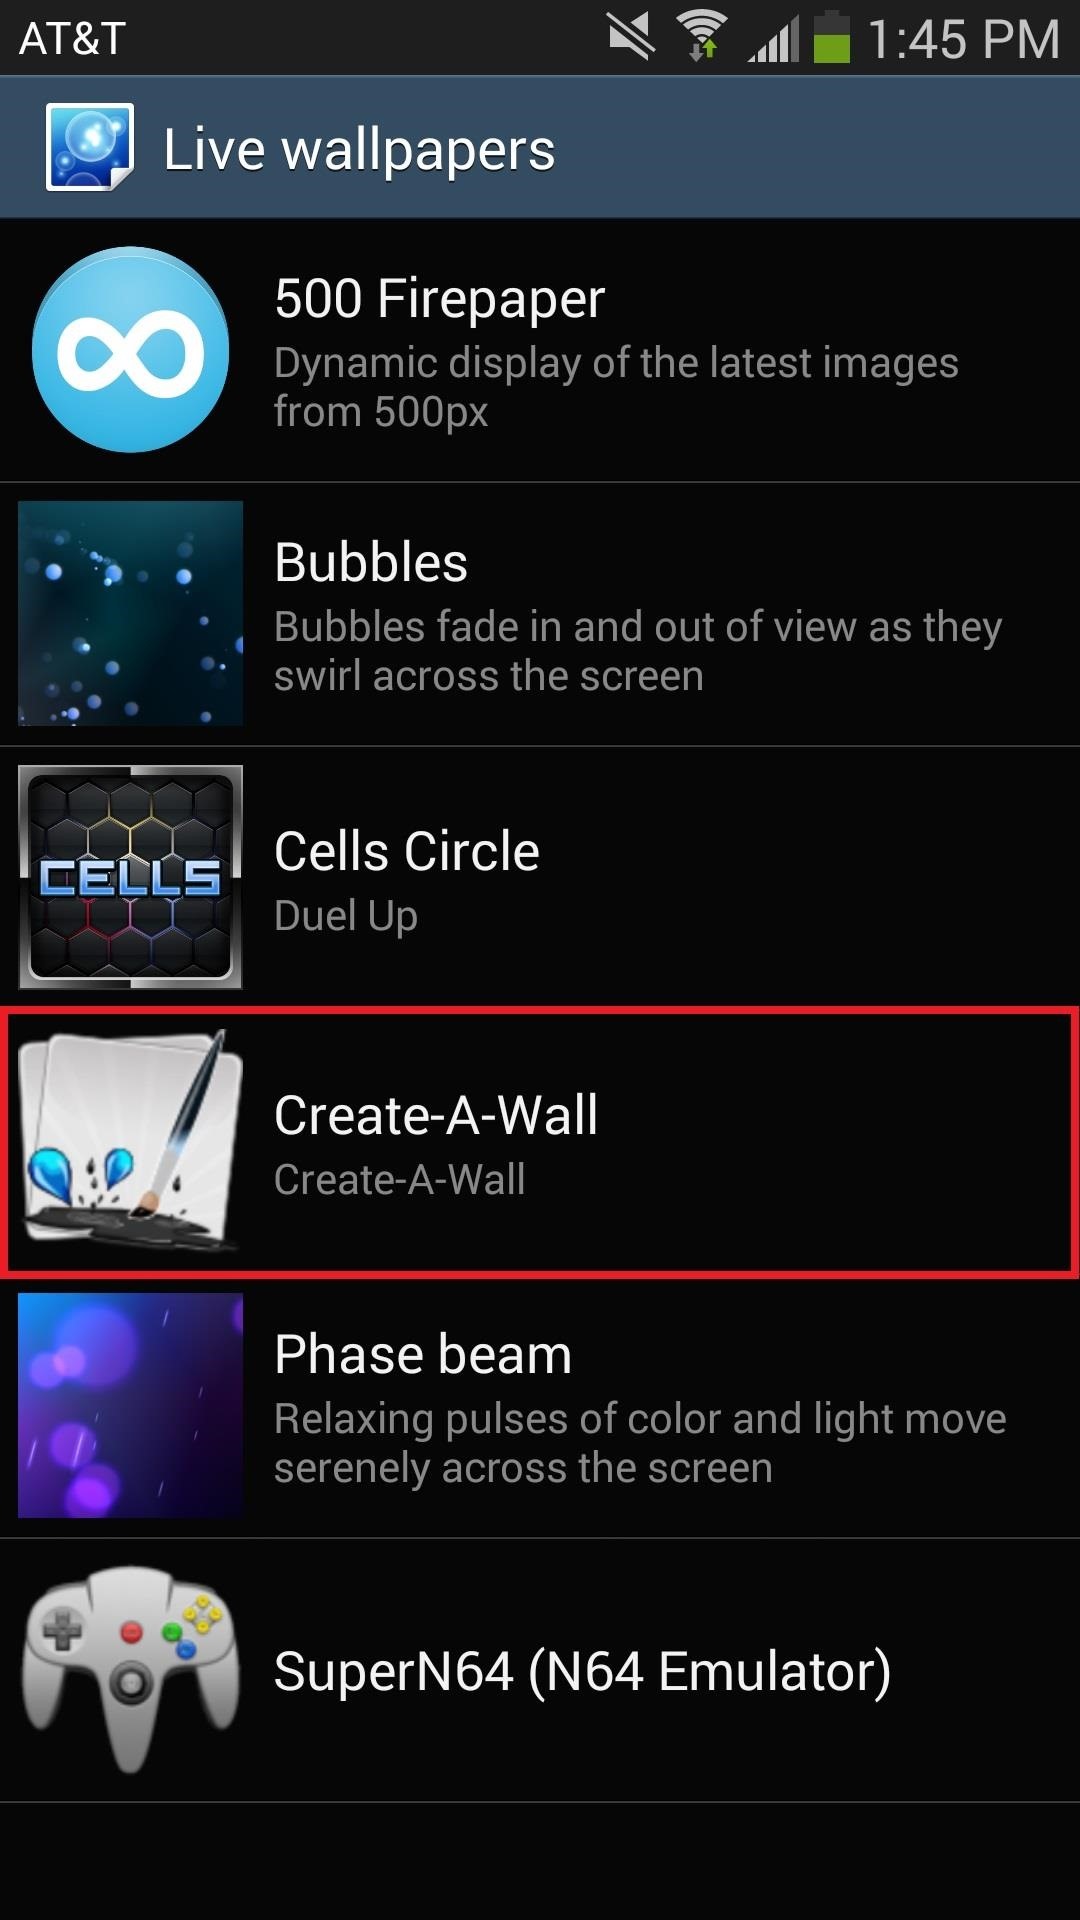 How to Add Floating Live Animations to Any Custom Wallpaper on a Galaxy Note 3